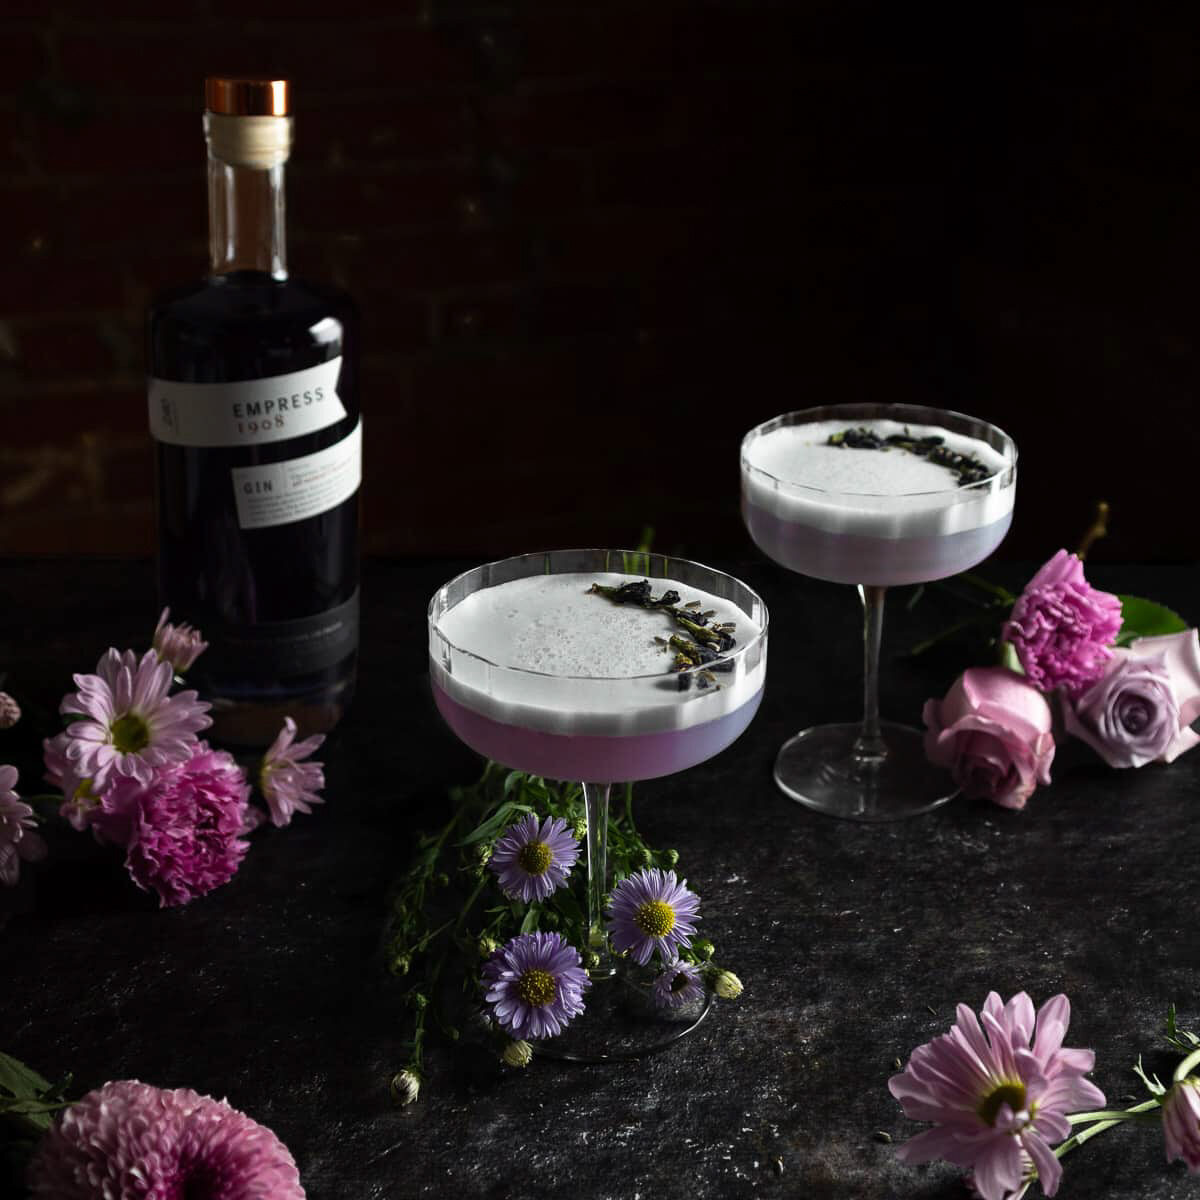 A dark background highlights lavender colored drinks in coupe glasses with a bottle of Empress purple gin and purple flowers all around.